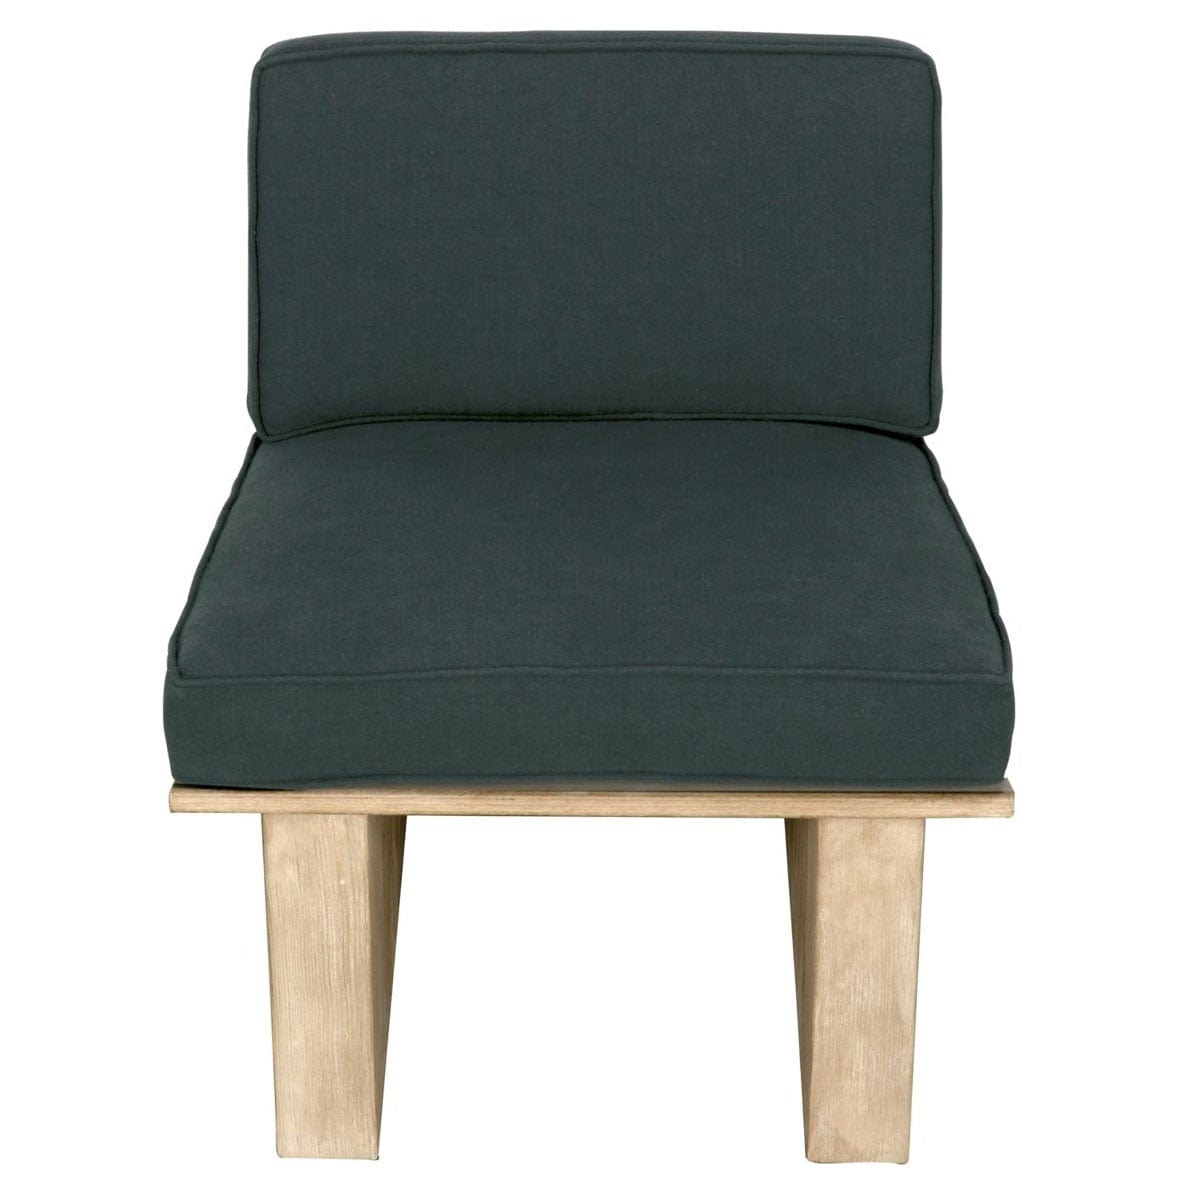 CFC Lorena Chair - HOLD FOR PRICING Furniture cfc-UP176